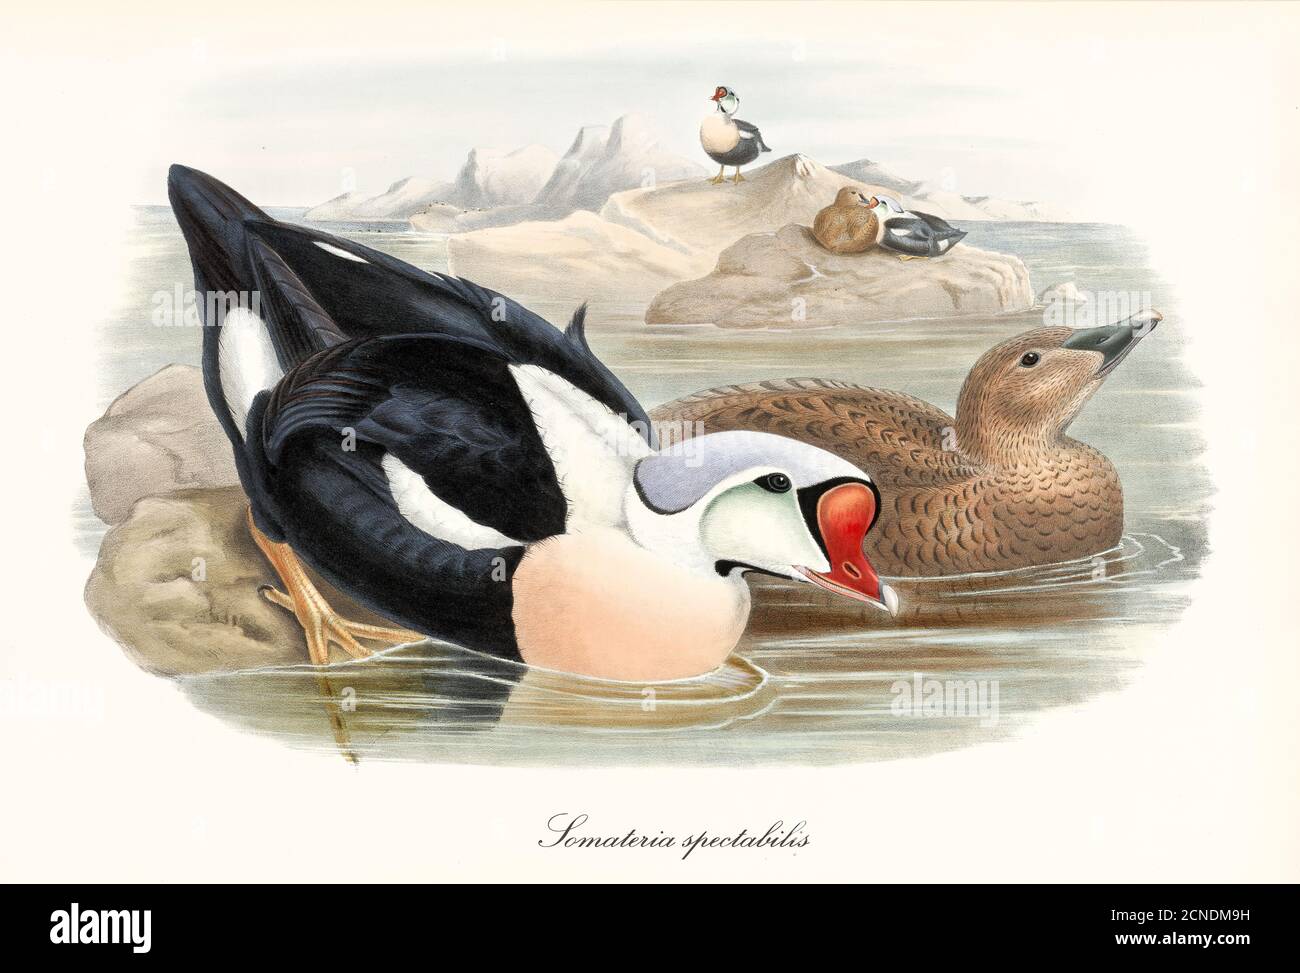 Aquatic bird with strange shaped red beak King Eider (Somateria spectabilis) entering in sea water from a rock. Art by John Gould London 1862-1873 Stock Photo